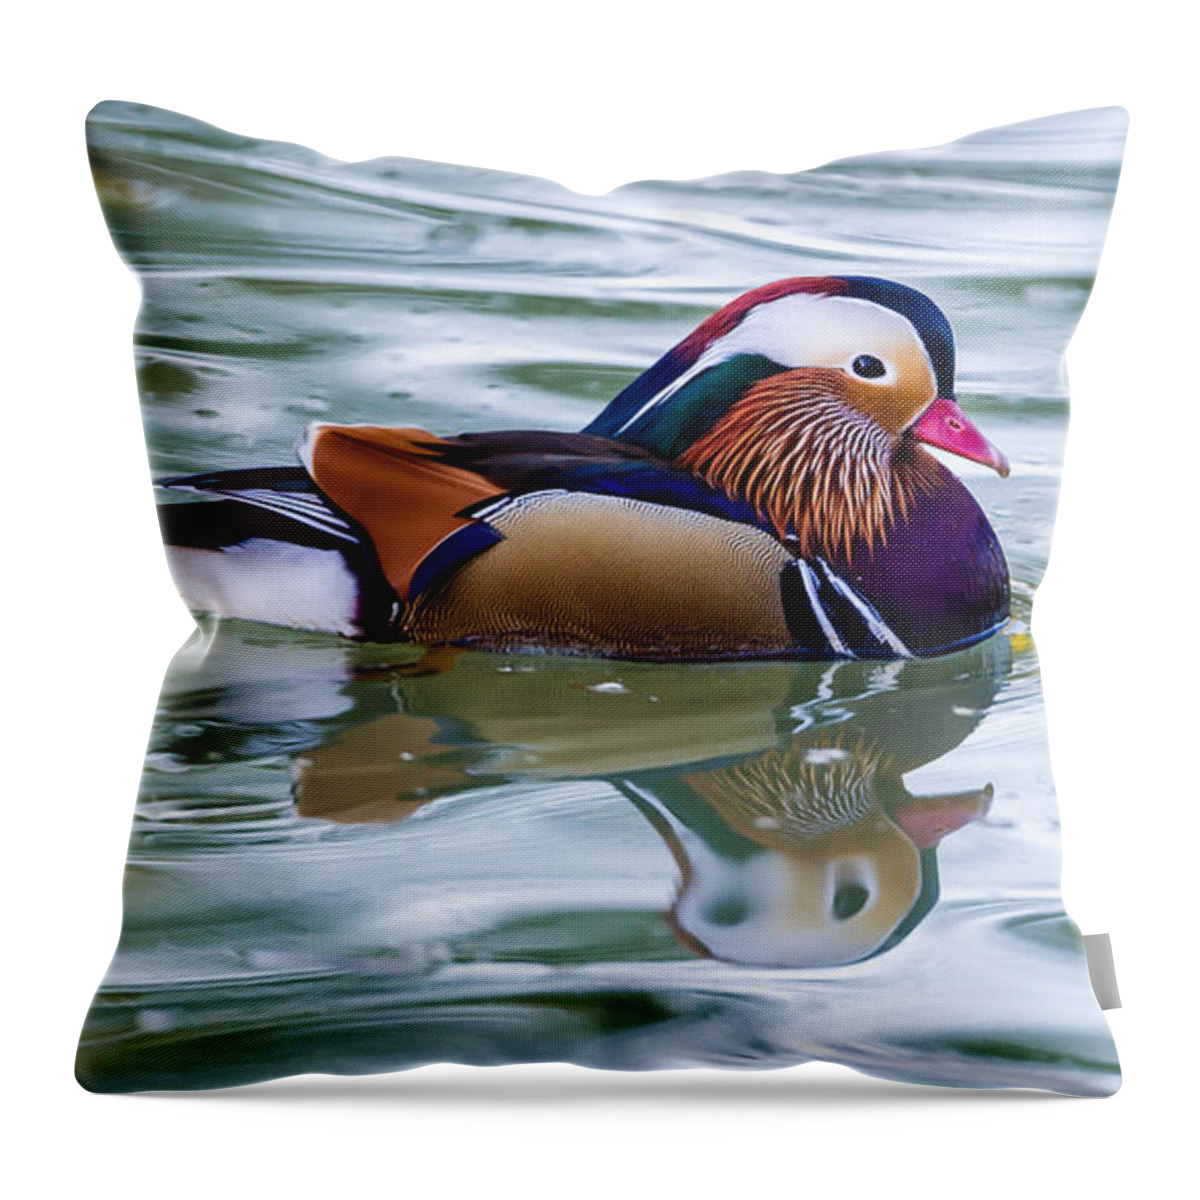 Colorful Throw Pillow featuring the photograph Colorful by Torbjorn Swenelius